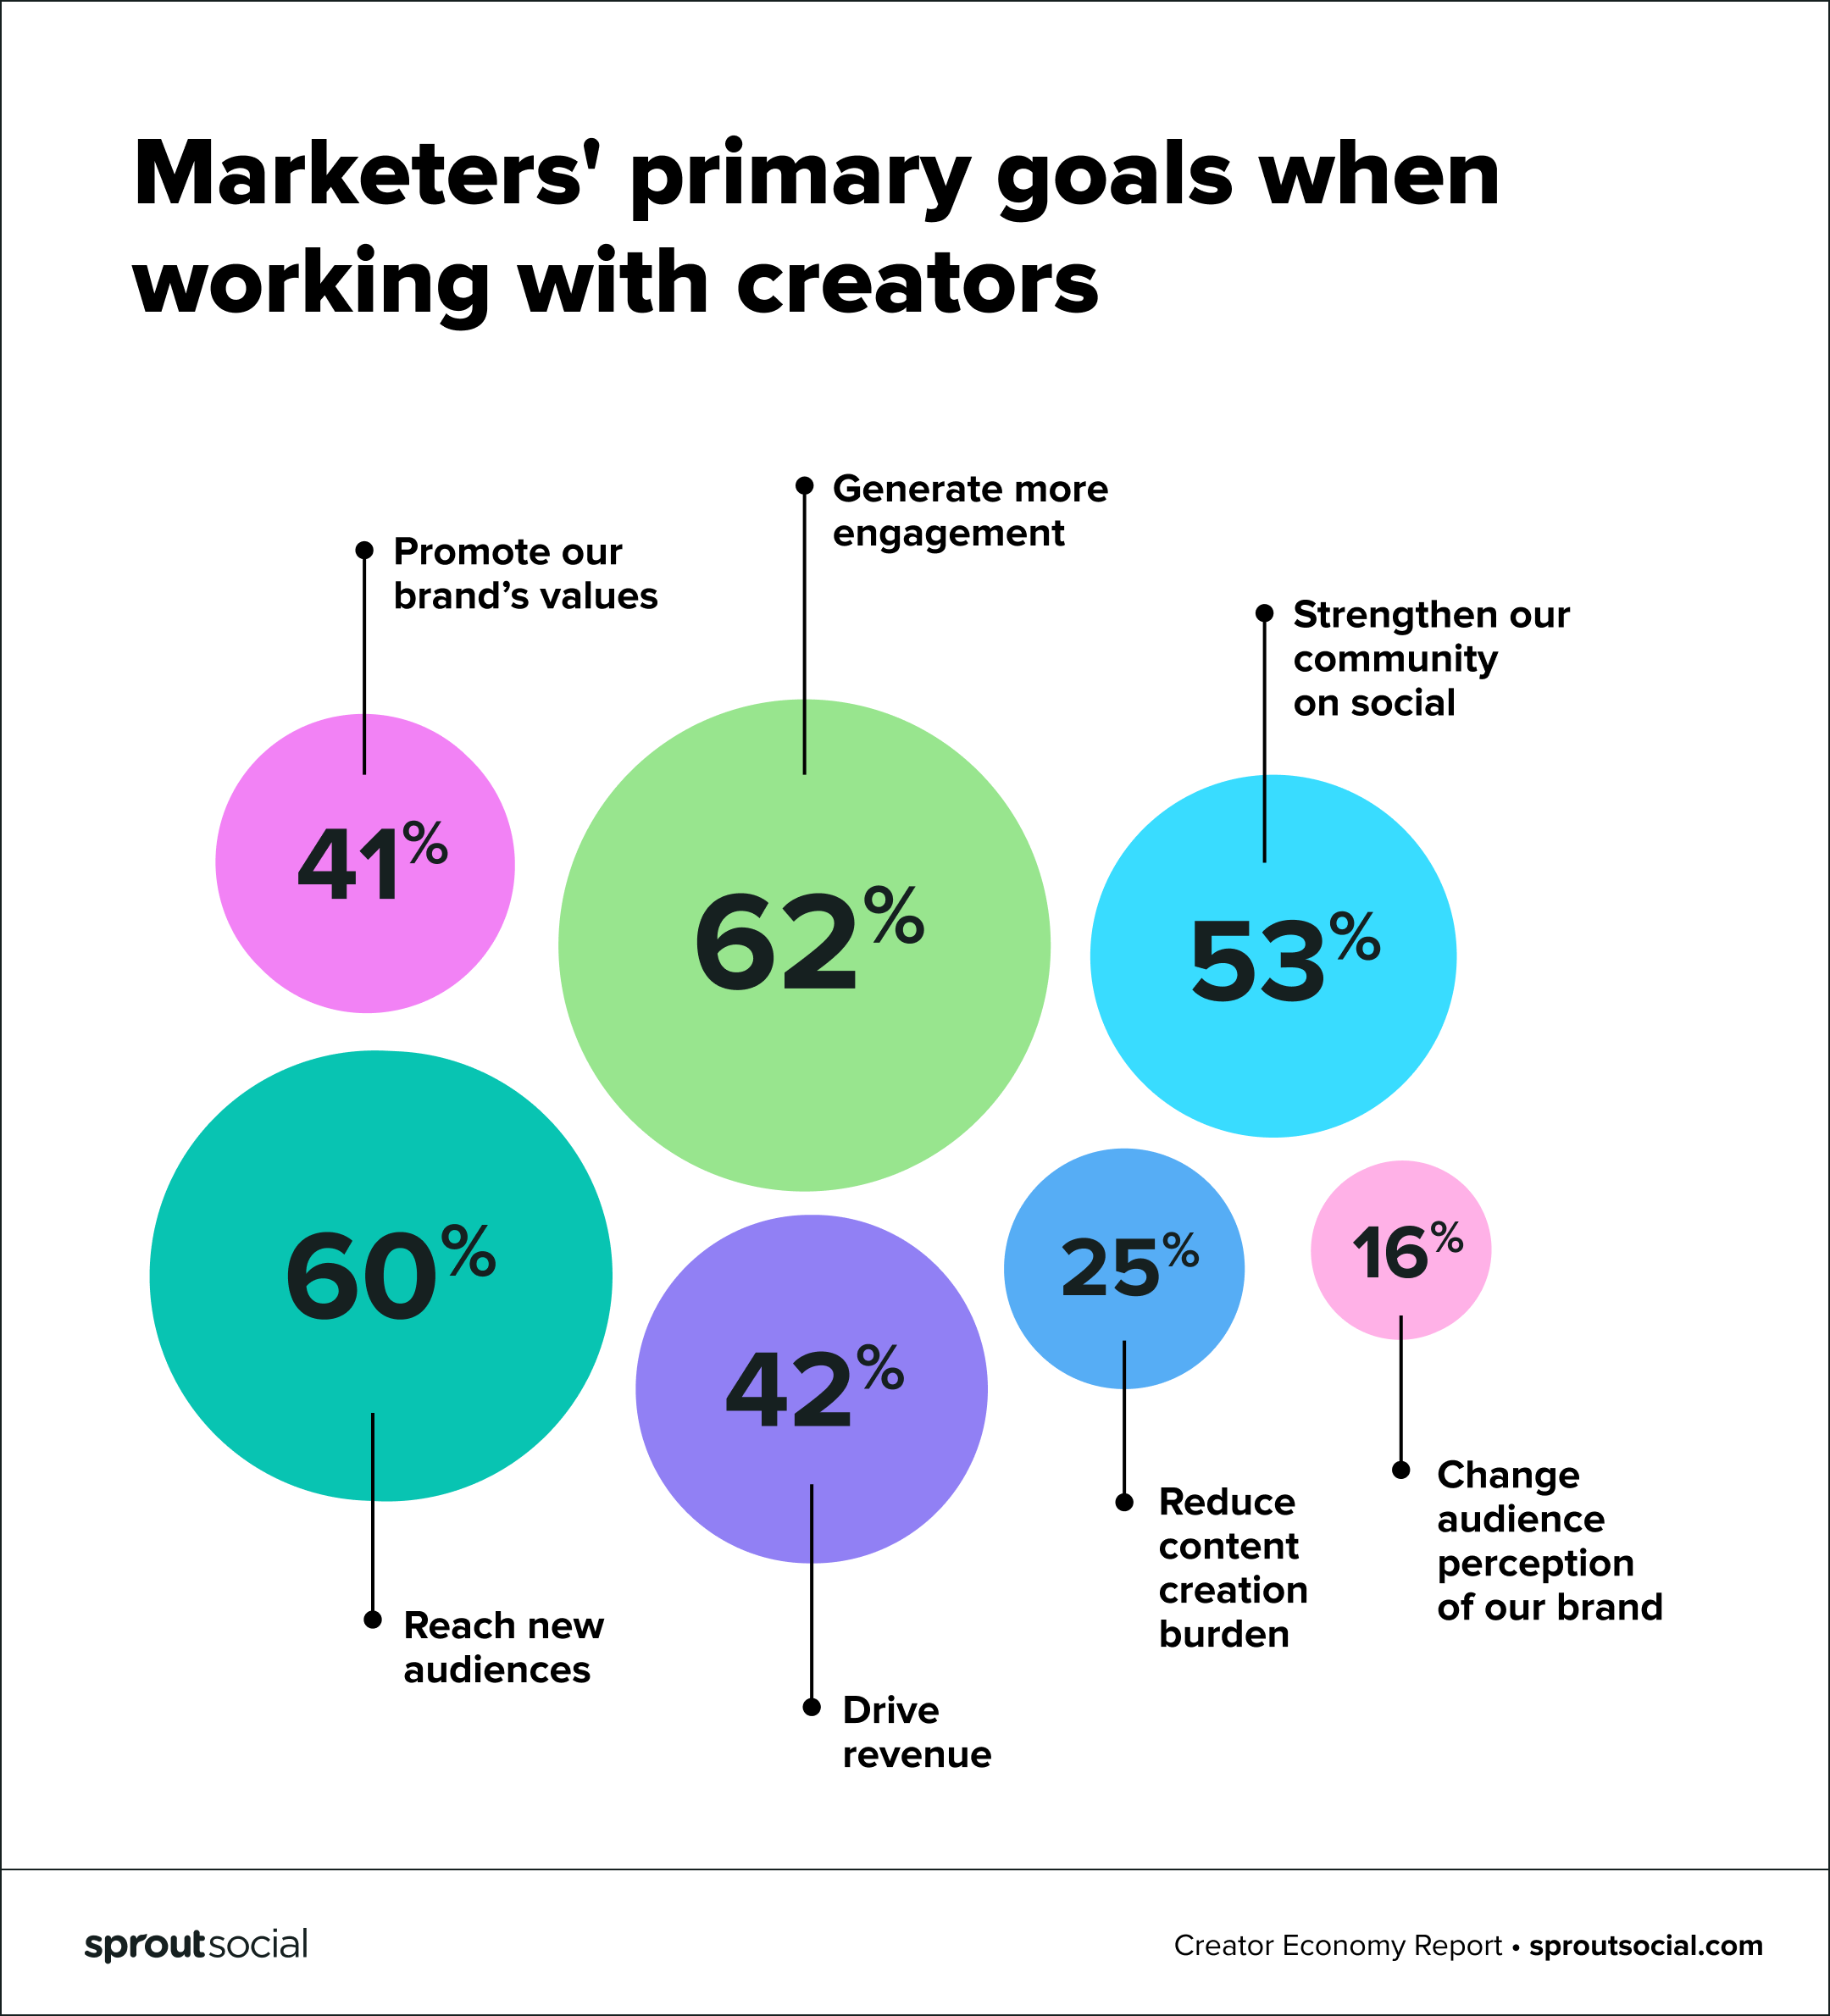 Data visualization showcasing marketers' primary goals when working with creators.